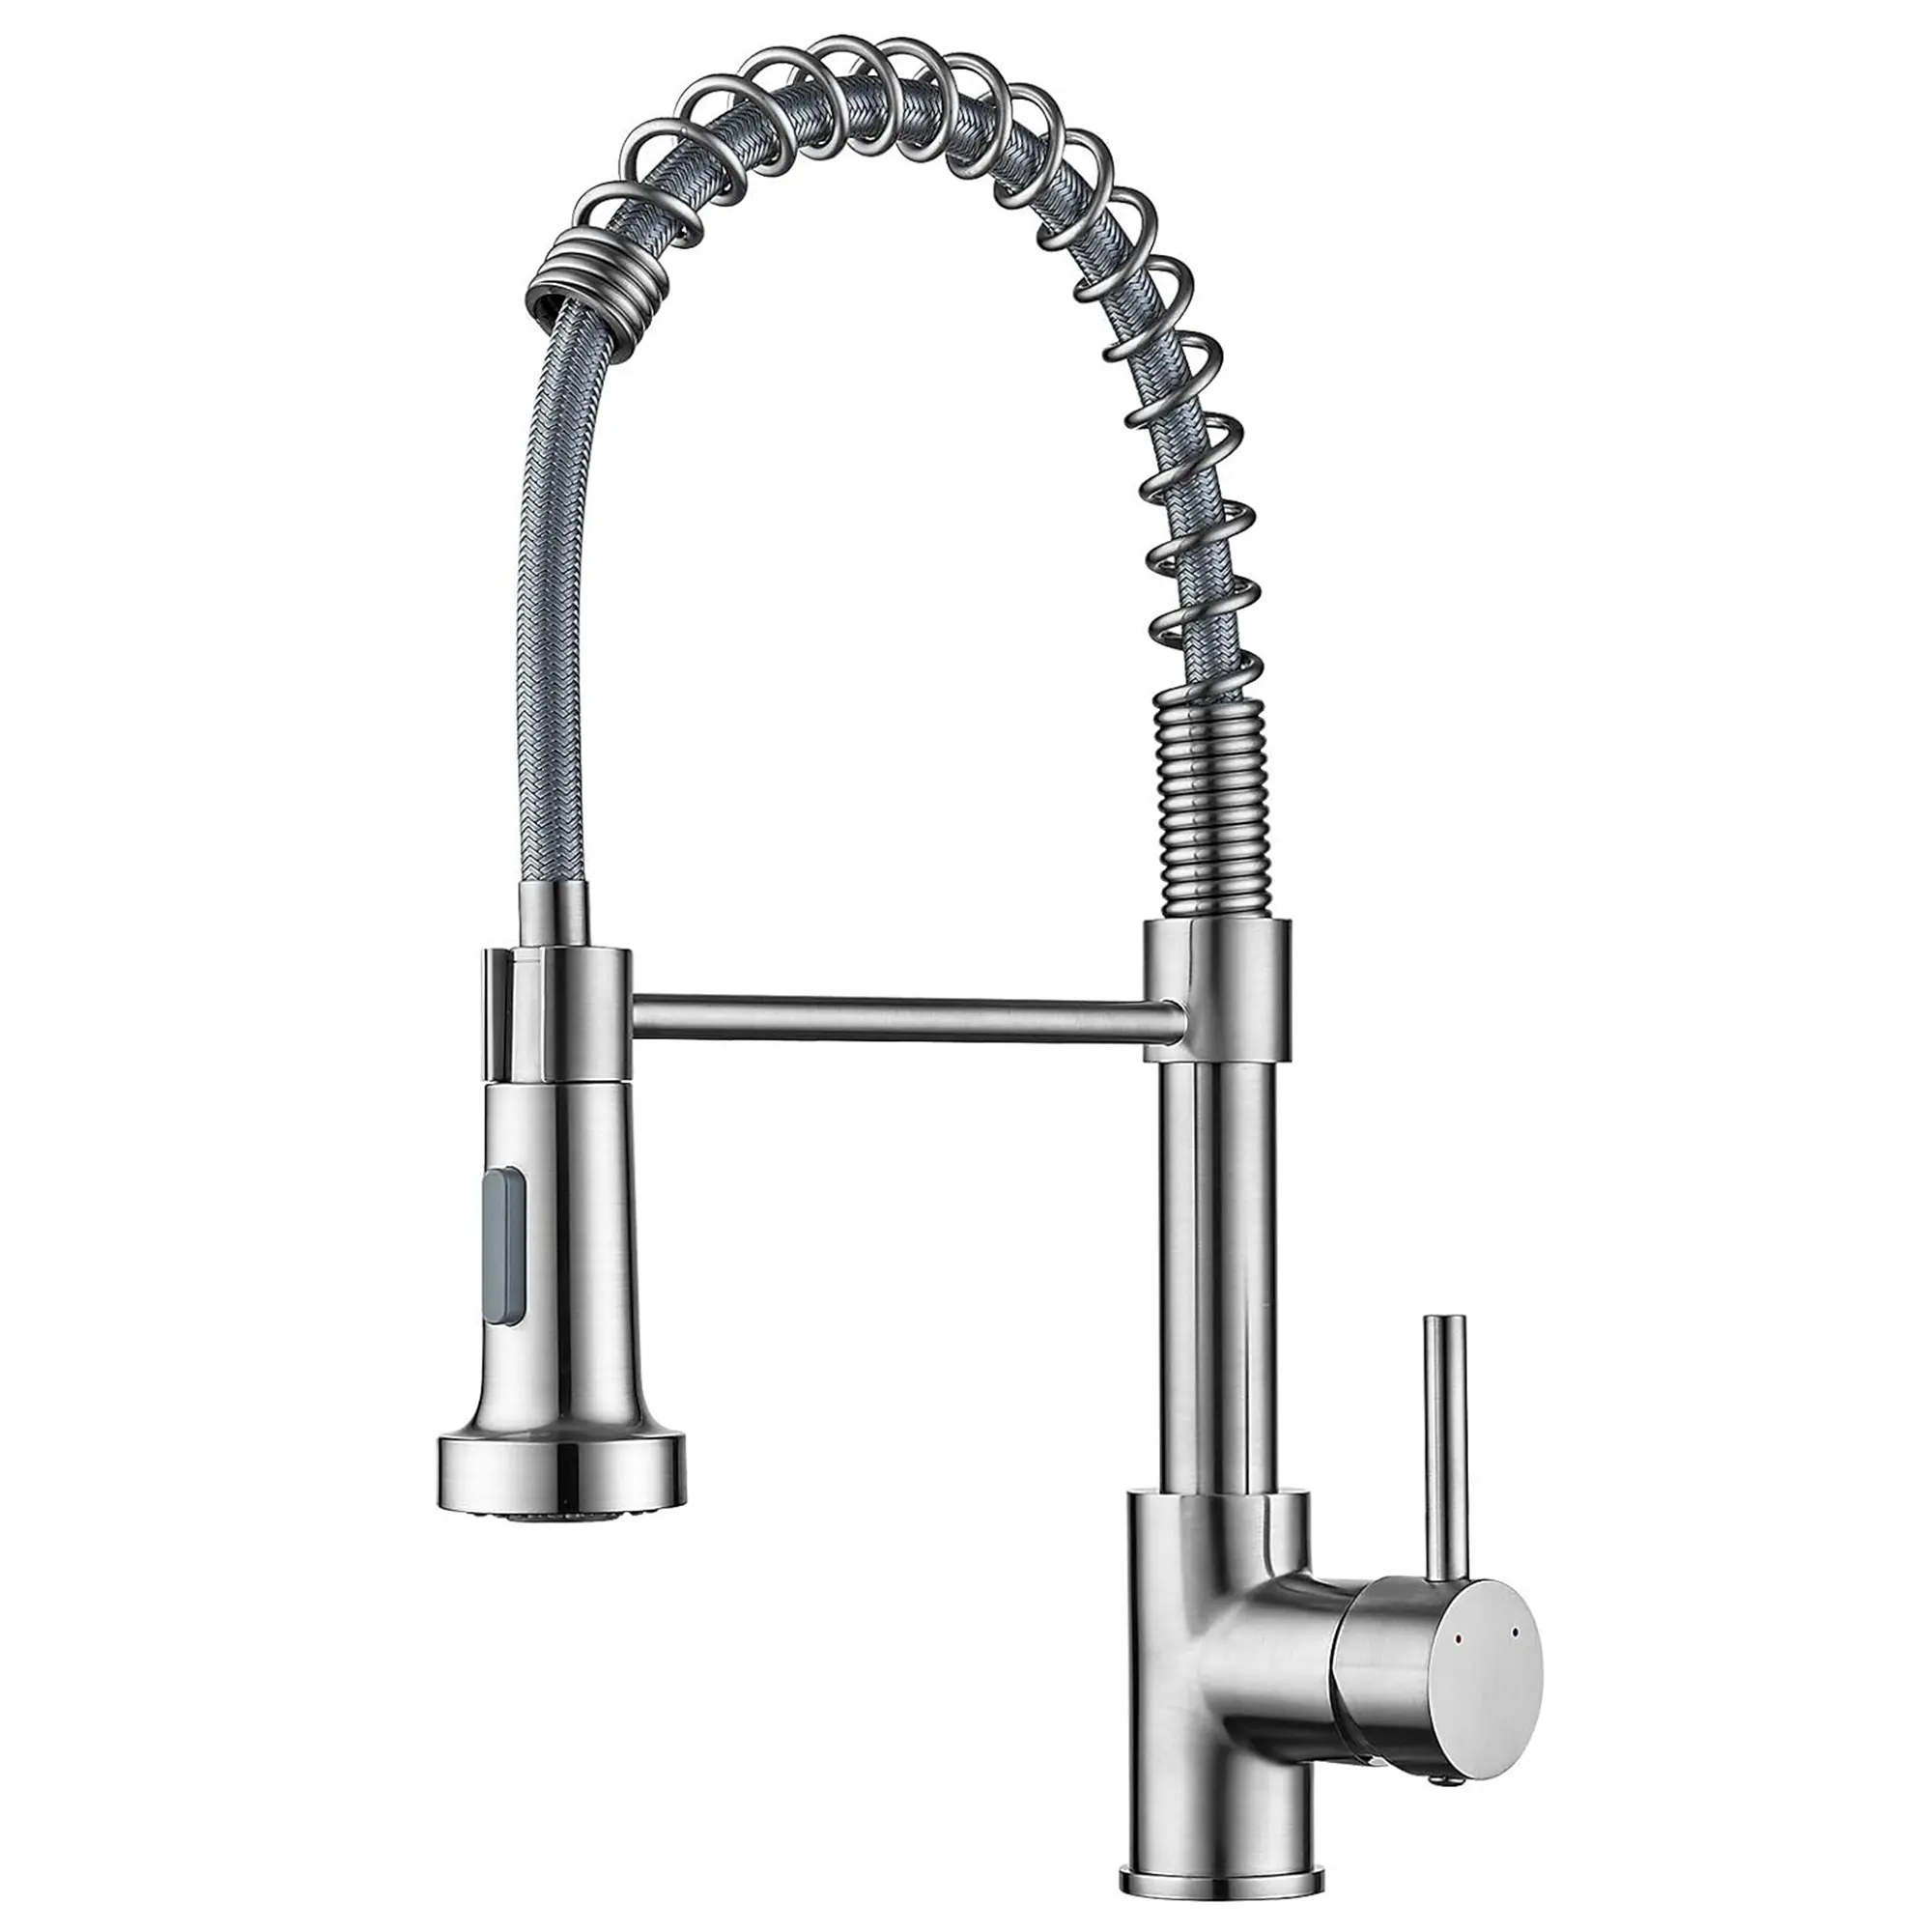 CYEN high quality multifunctional outlet water easy installation pull down spray brushed nickle sink faucets kitchen faucet